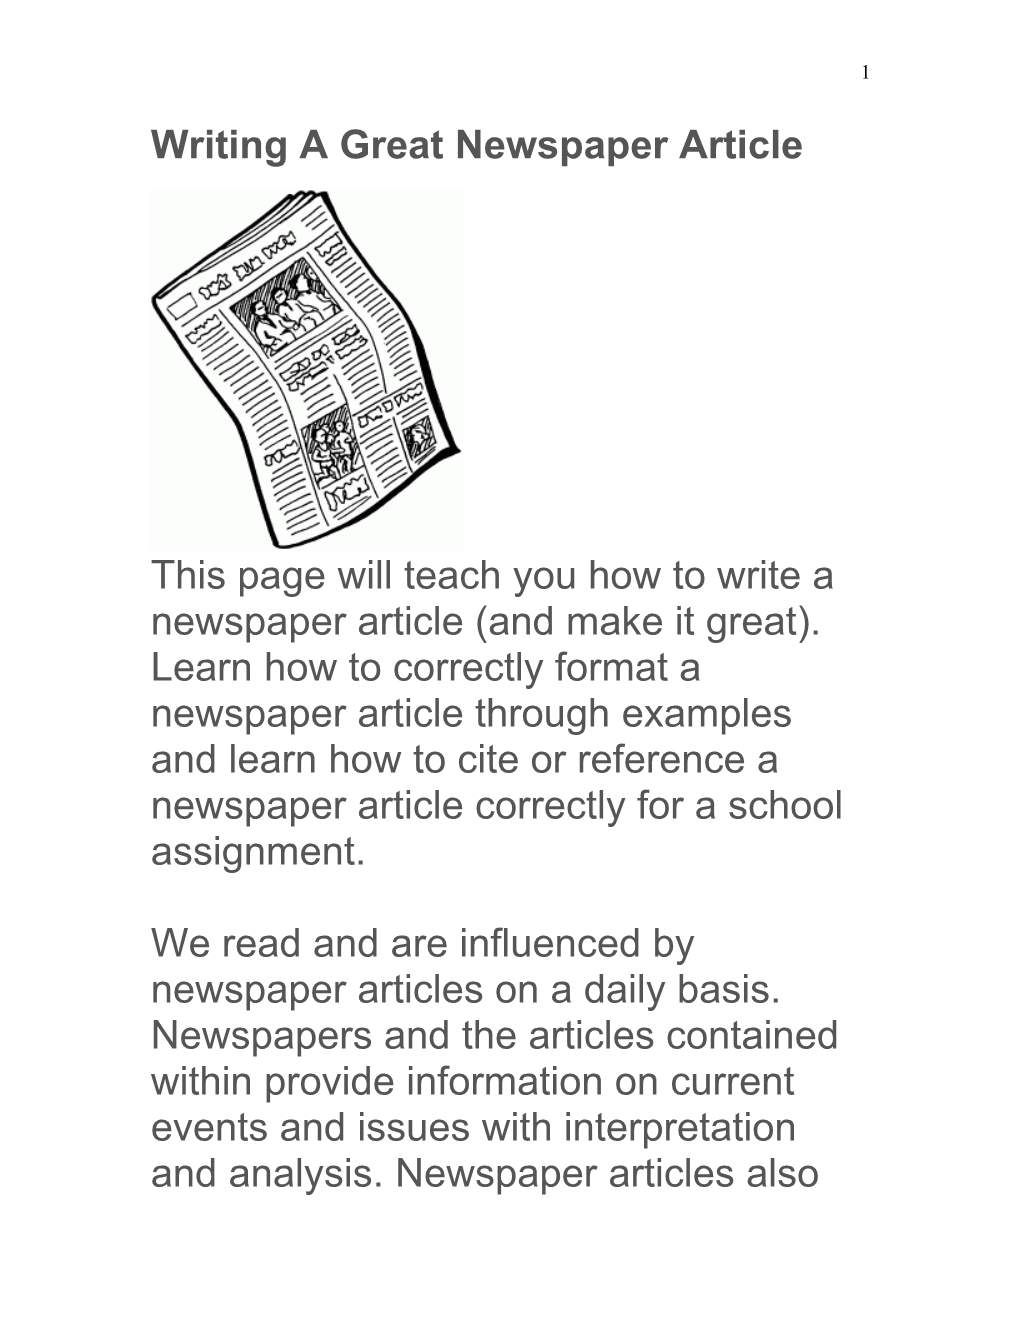 Writing a Great Newspaper Article